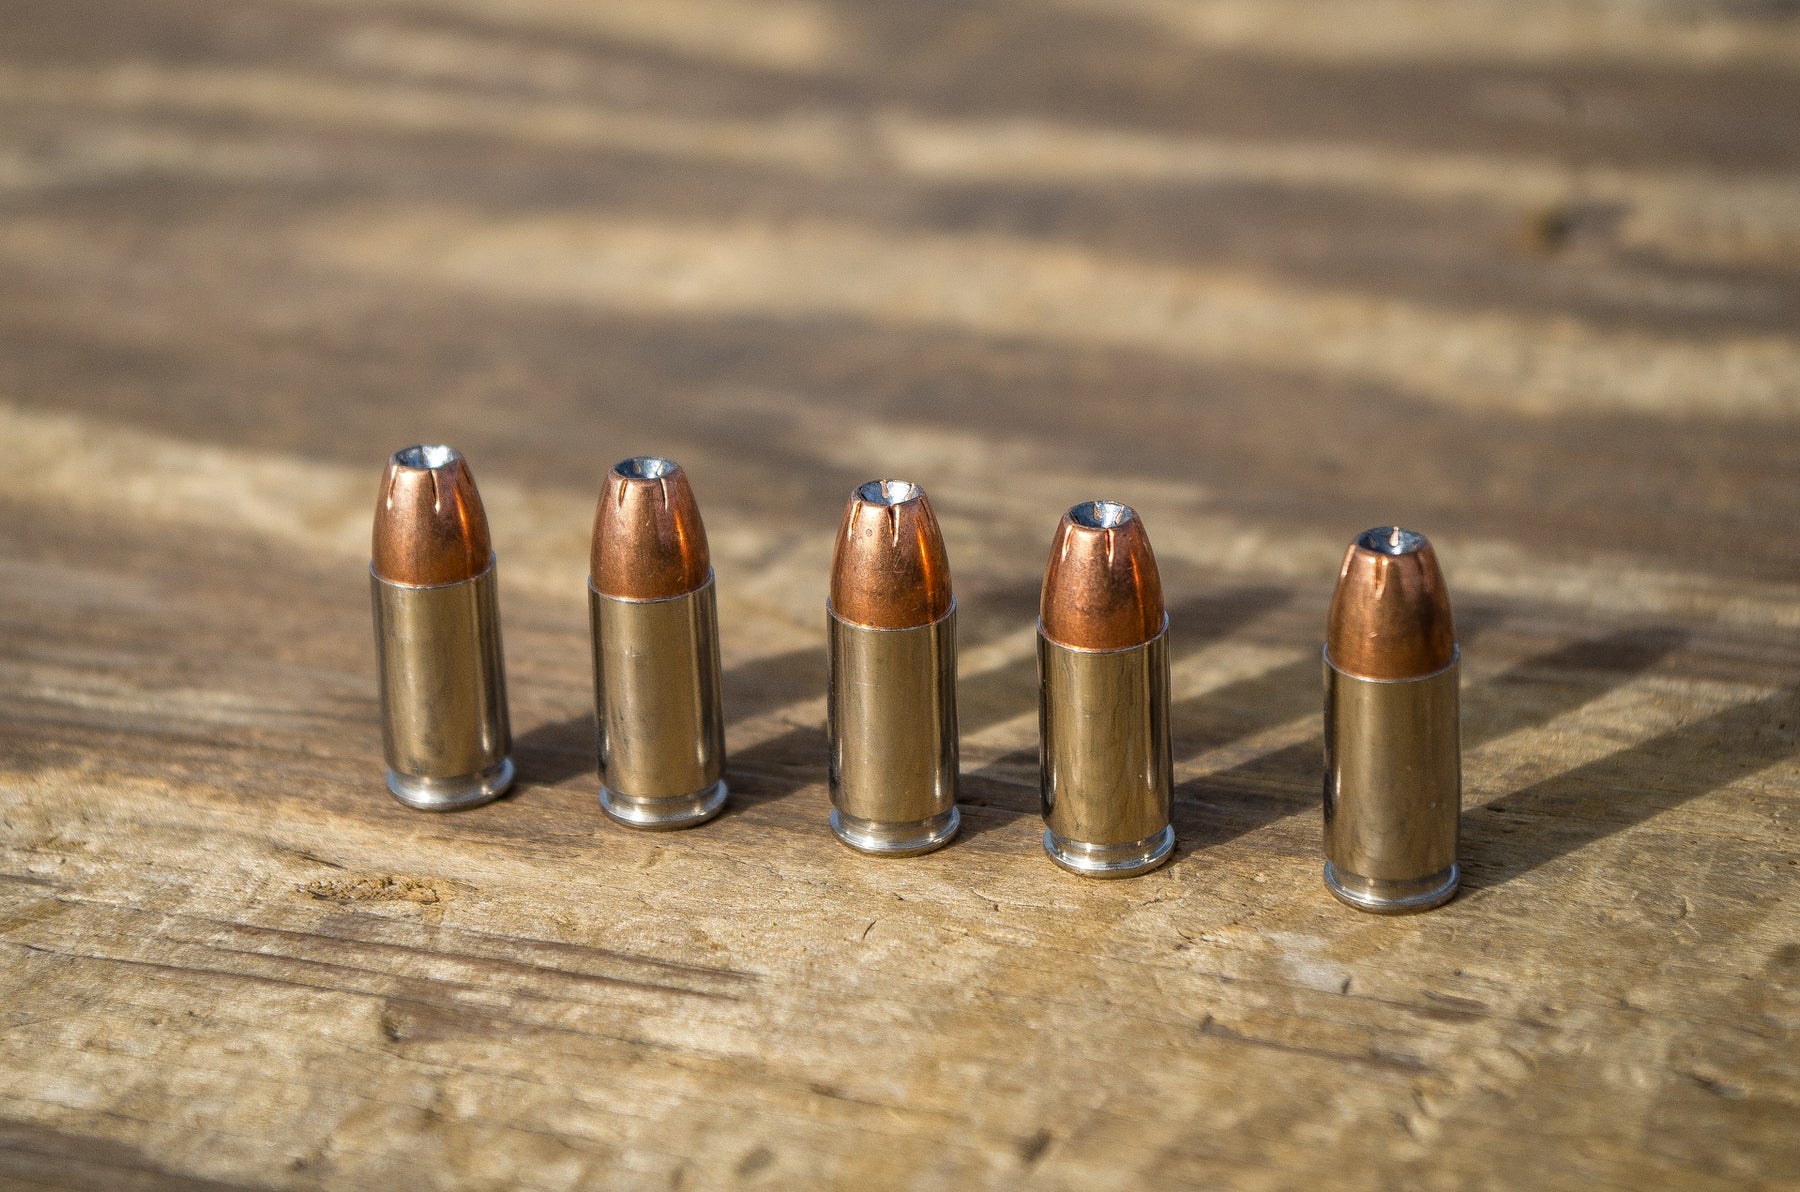 How the UL752 5-Shot Pattern Safety Standard Can Protect You